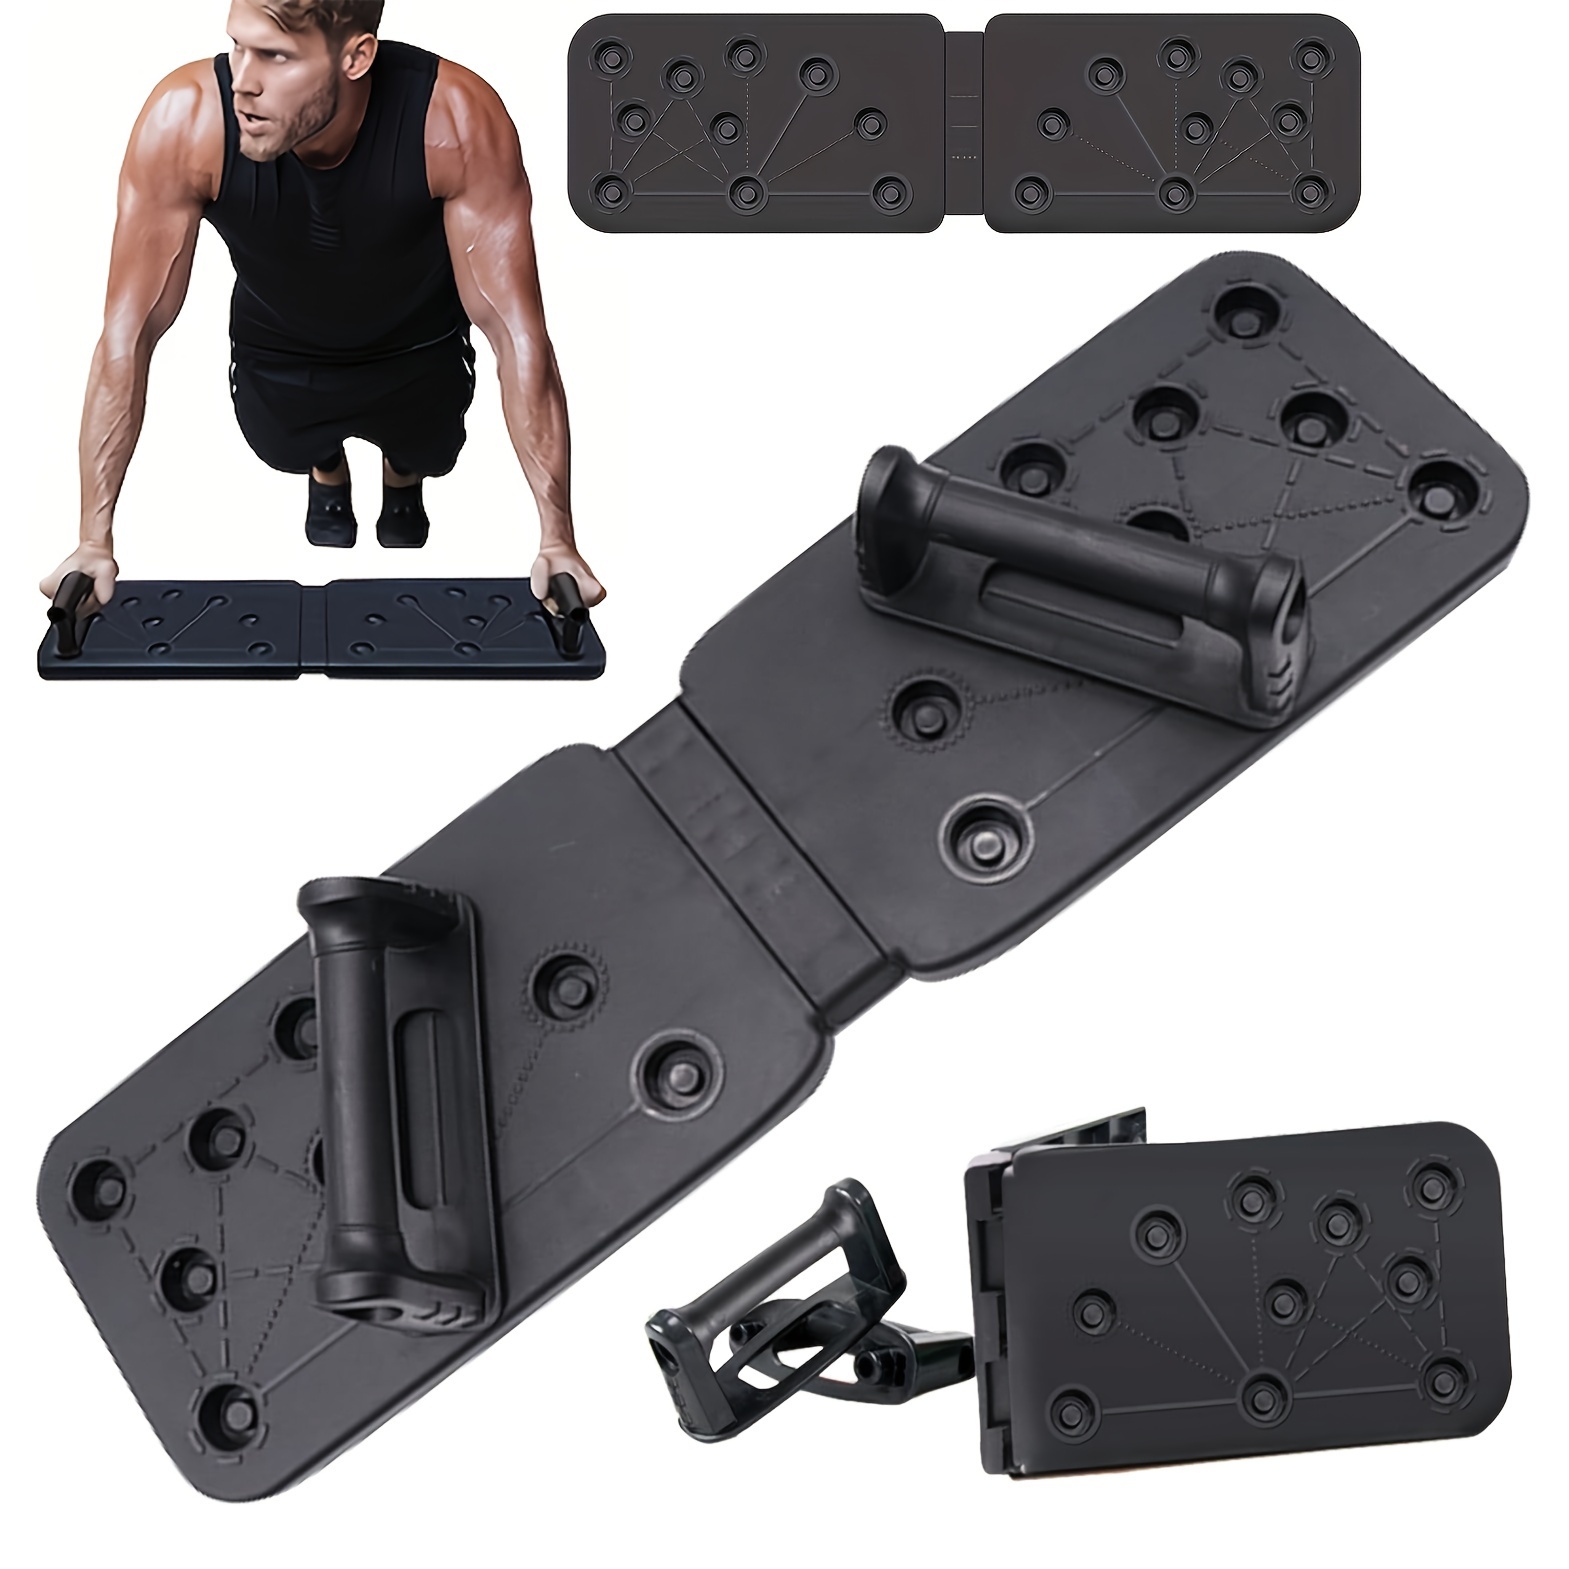 Portable Multifunctional Push-up Training Board For Men's Chest And  Abdominal Muscles - Effective Home Workout Equipment - Temu